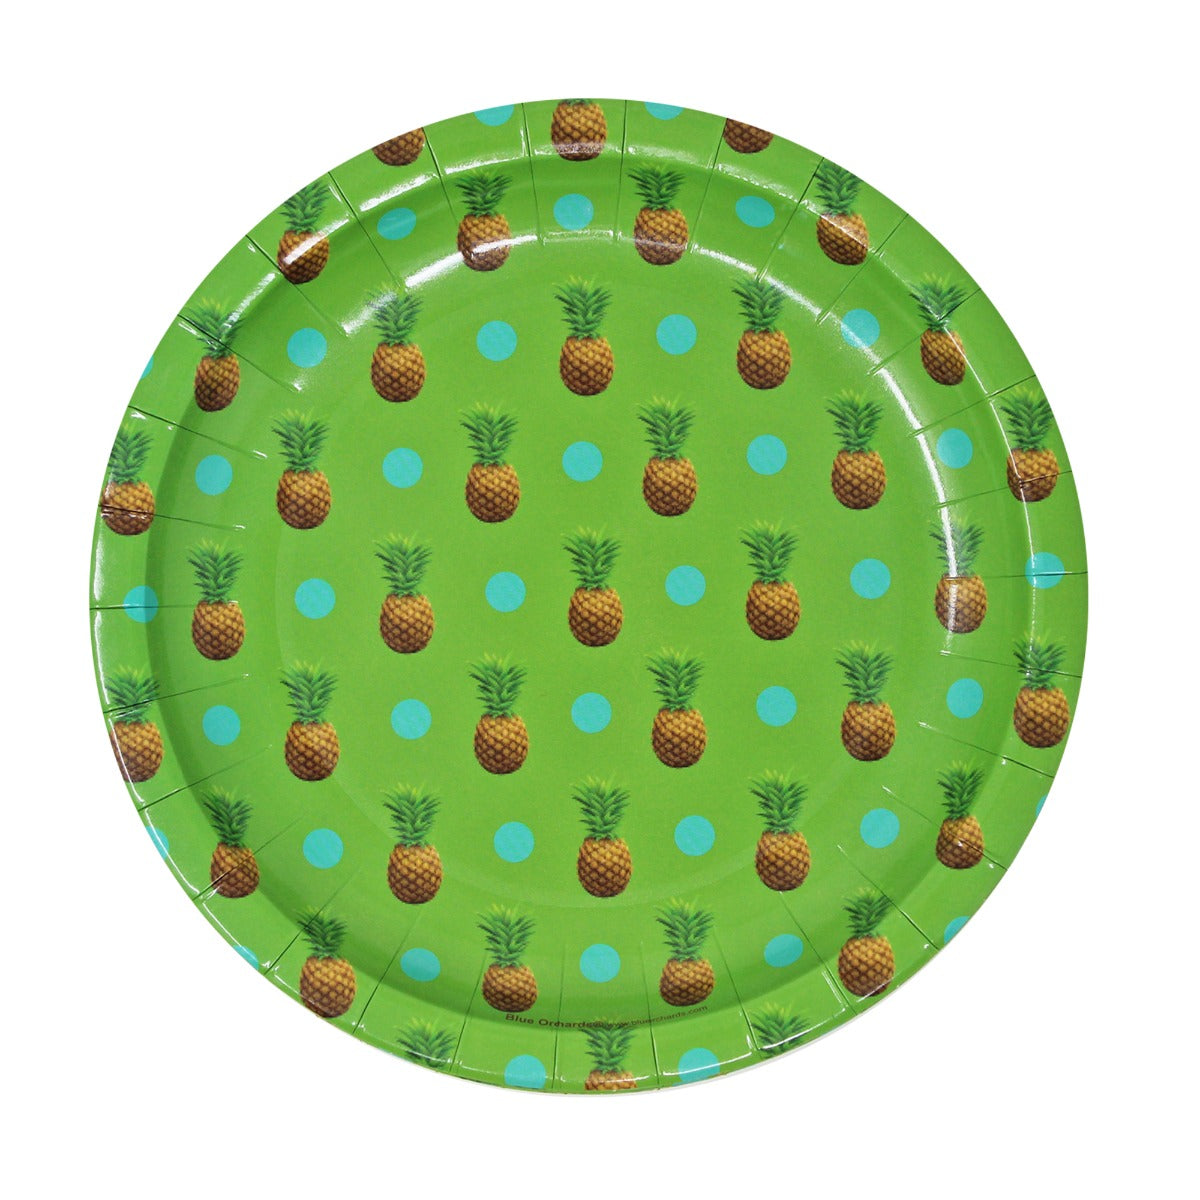 pineapple plates paper party
pineapple napkins and plates
pineapple themed party supplies
pineapple plate
pineapple decorations for party set
pineapple dessert plates
pineapple party supplies birthday
pineapple party decorations and supplies